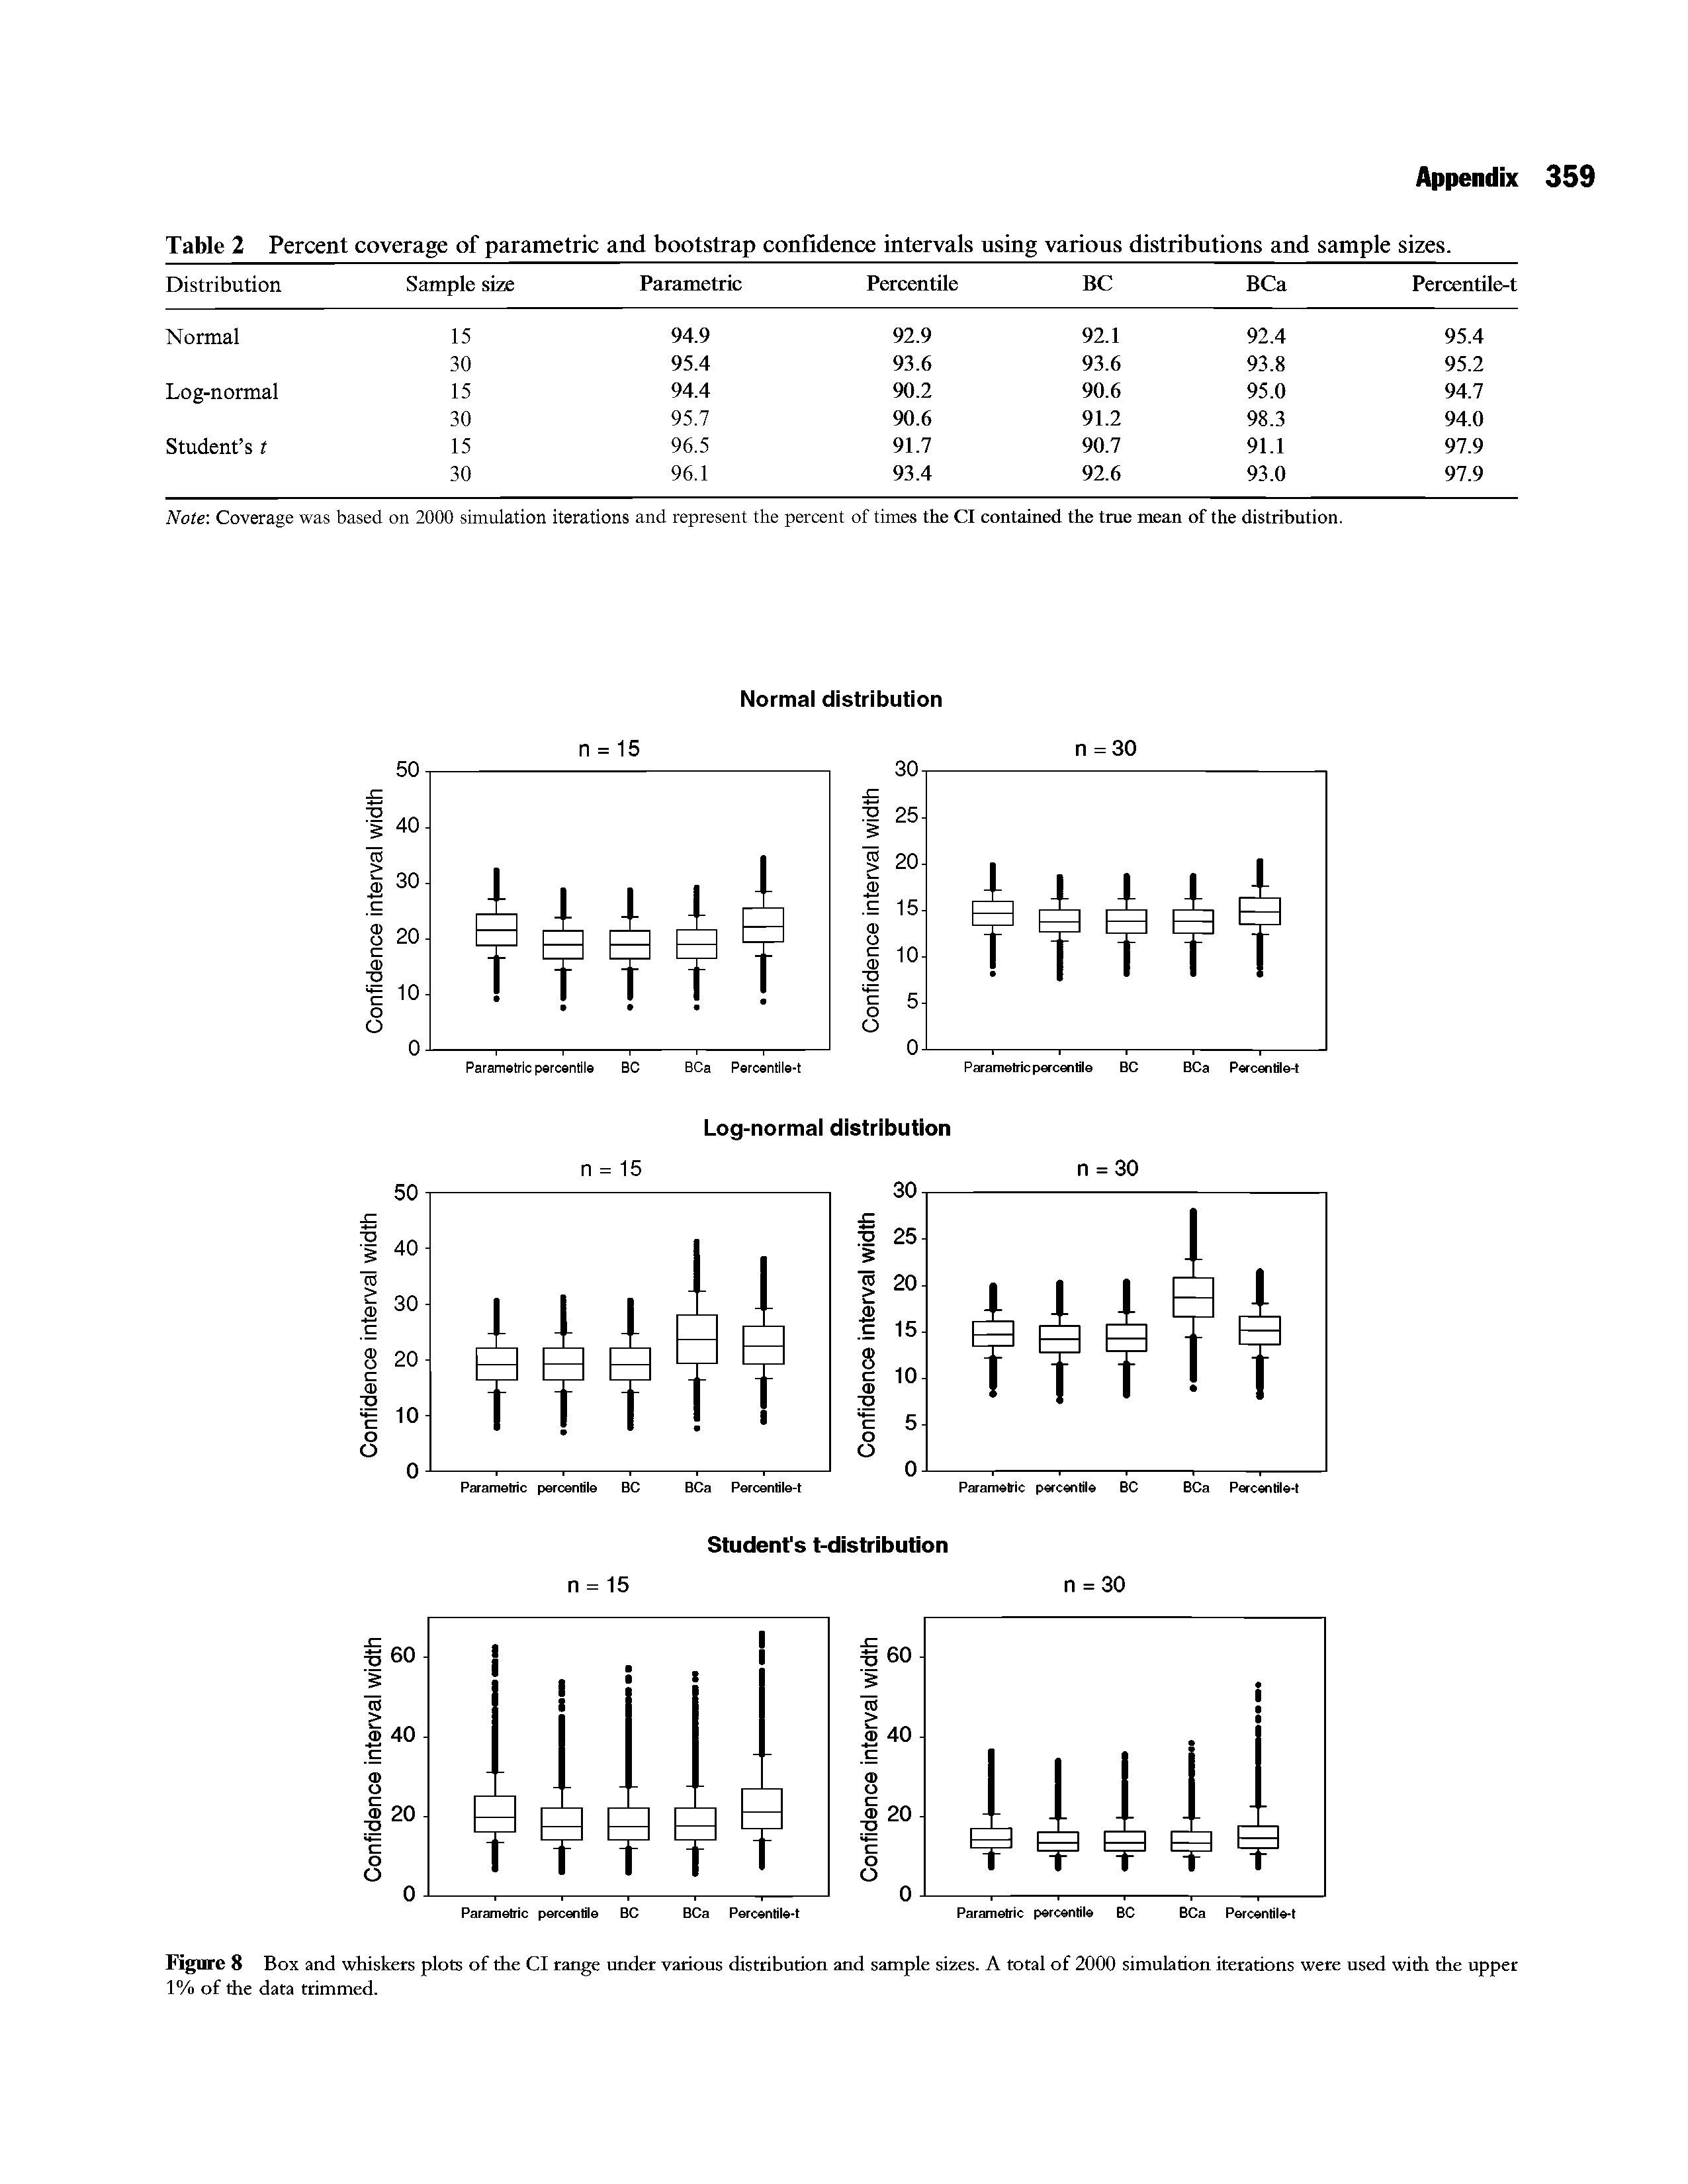 Table 2 Percent coverage of parametric and bootstrap confidence intervals using various distributions and sample sizes.